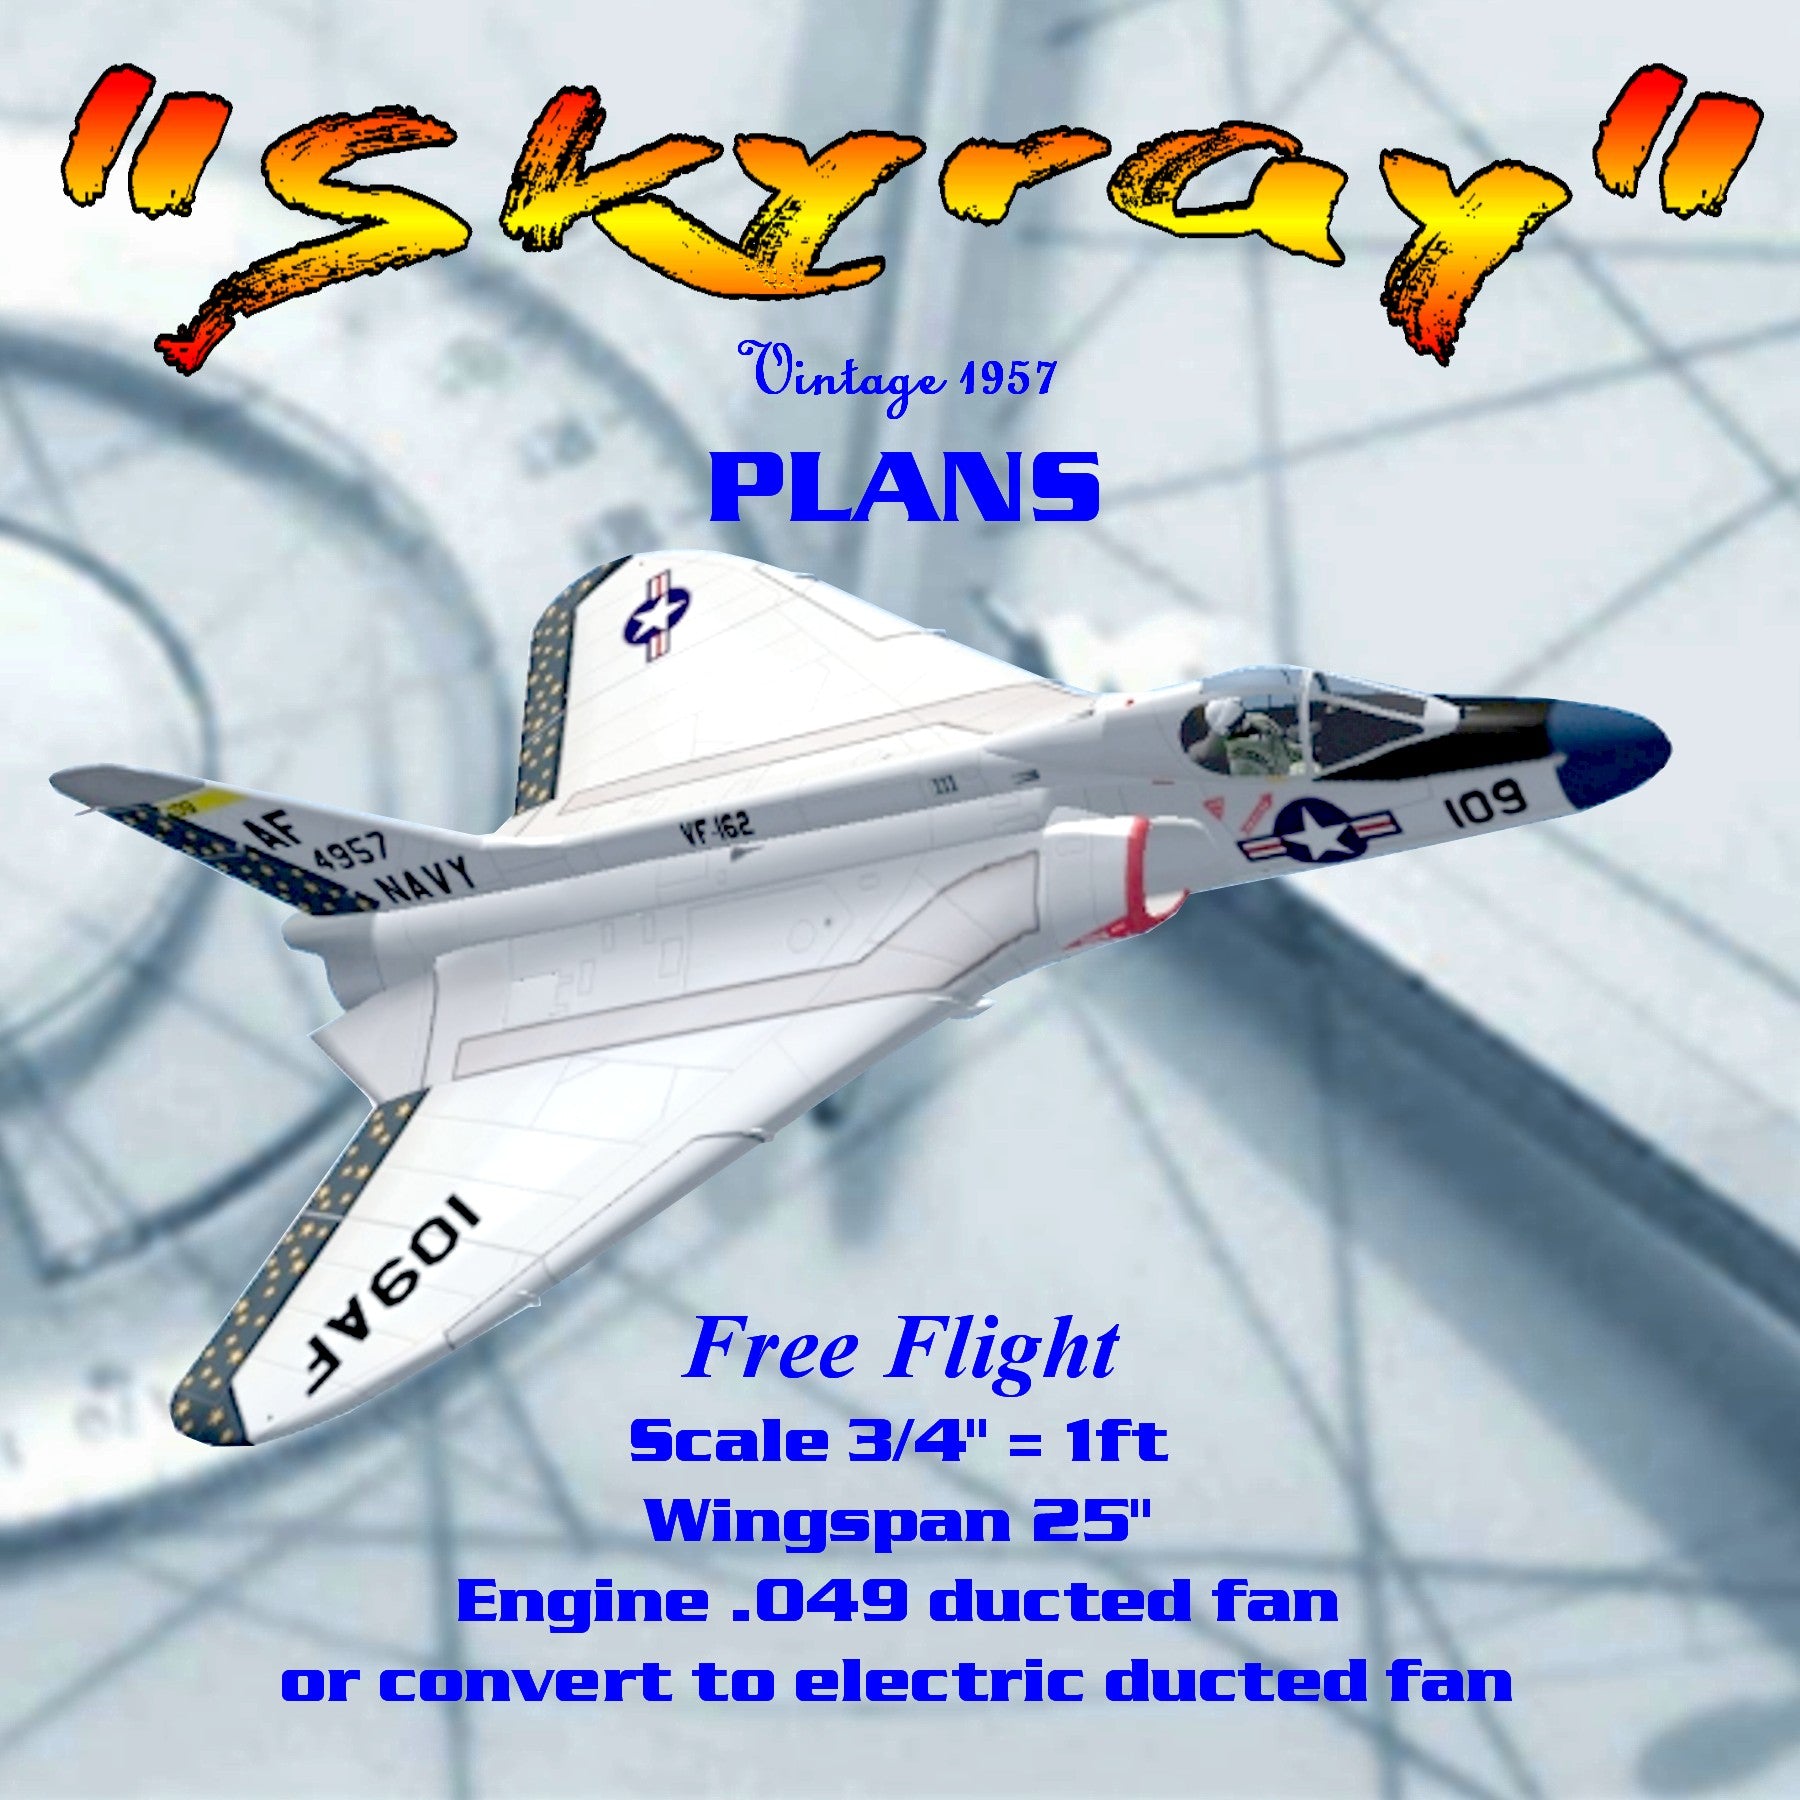 full size printed plan scale 3/4" = 1ft reproduced berkeley skyray  .049 or electric ducted fan